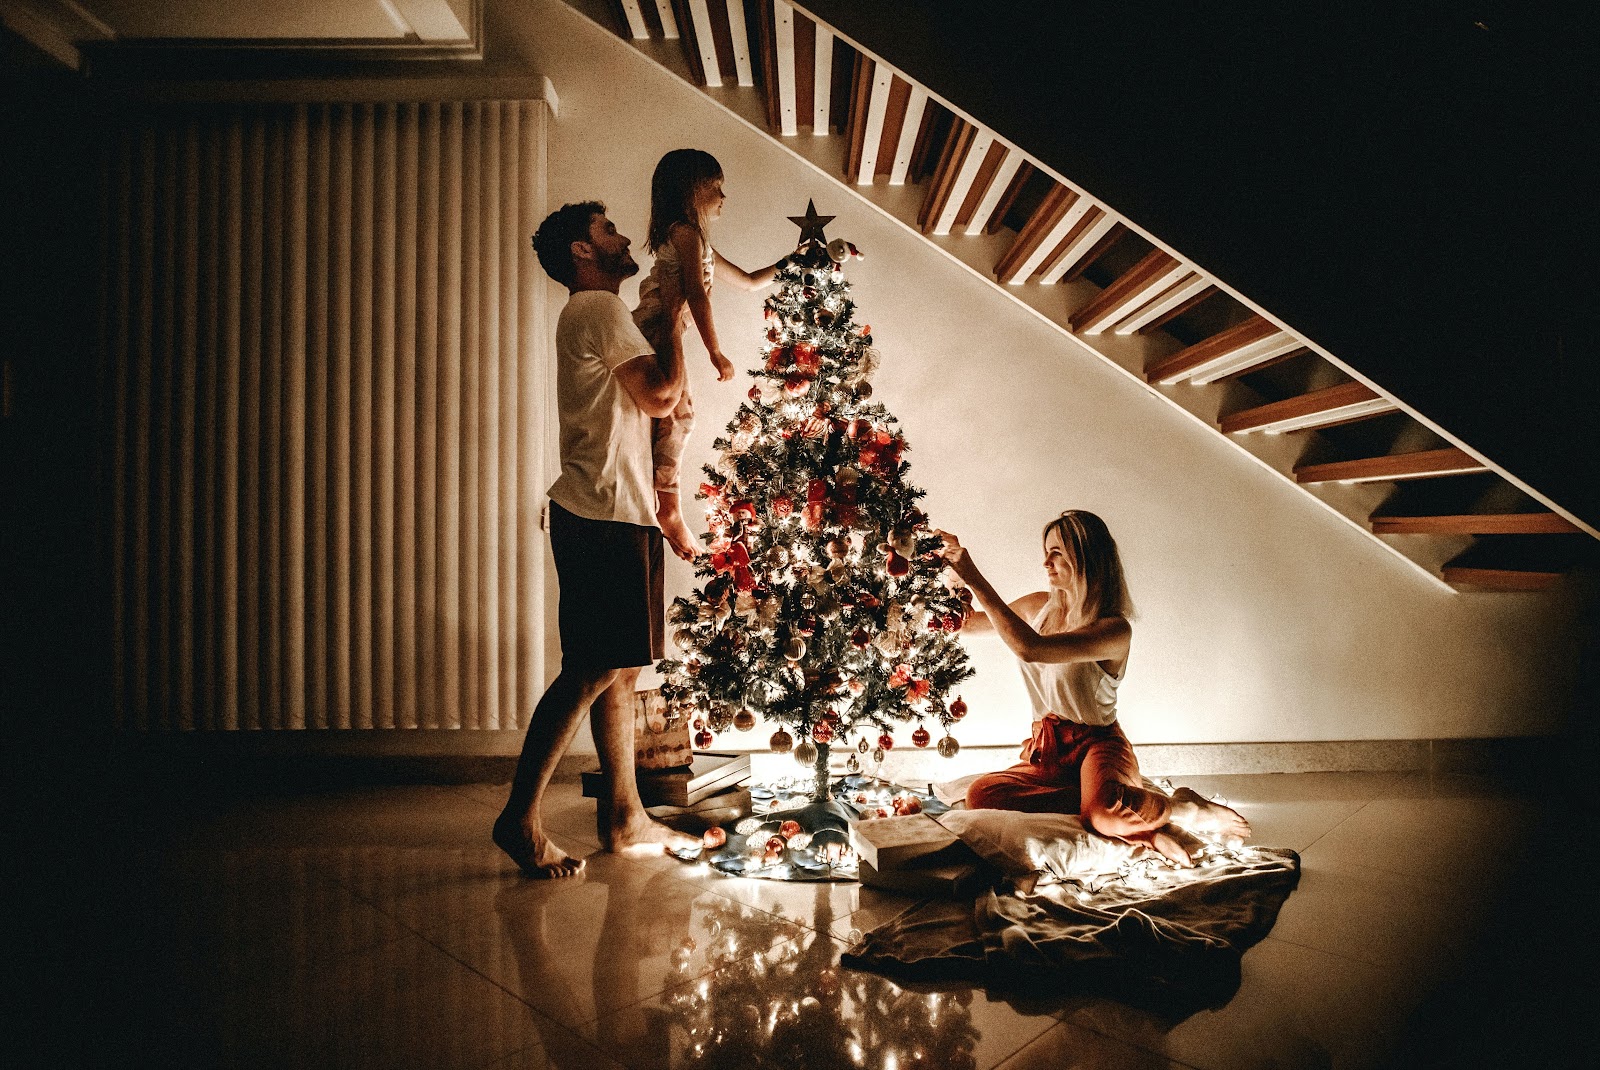 A family decorating a Christmas tree.